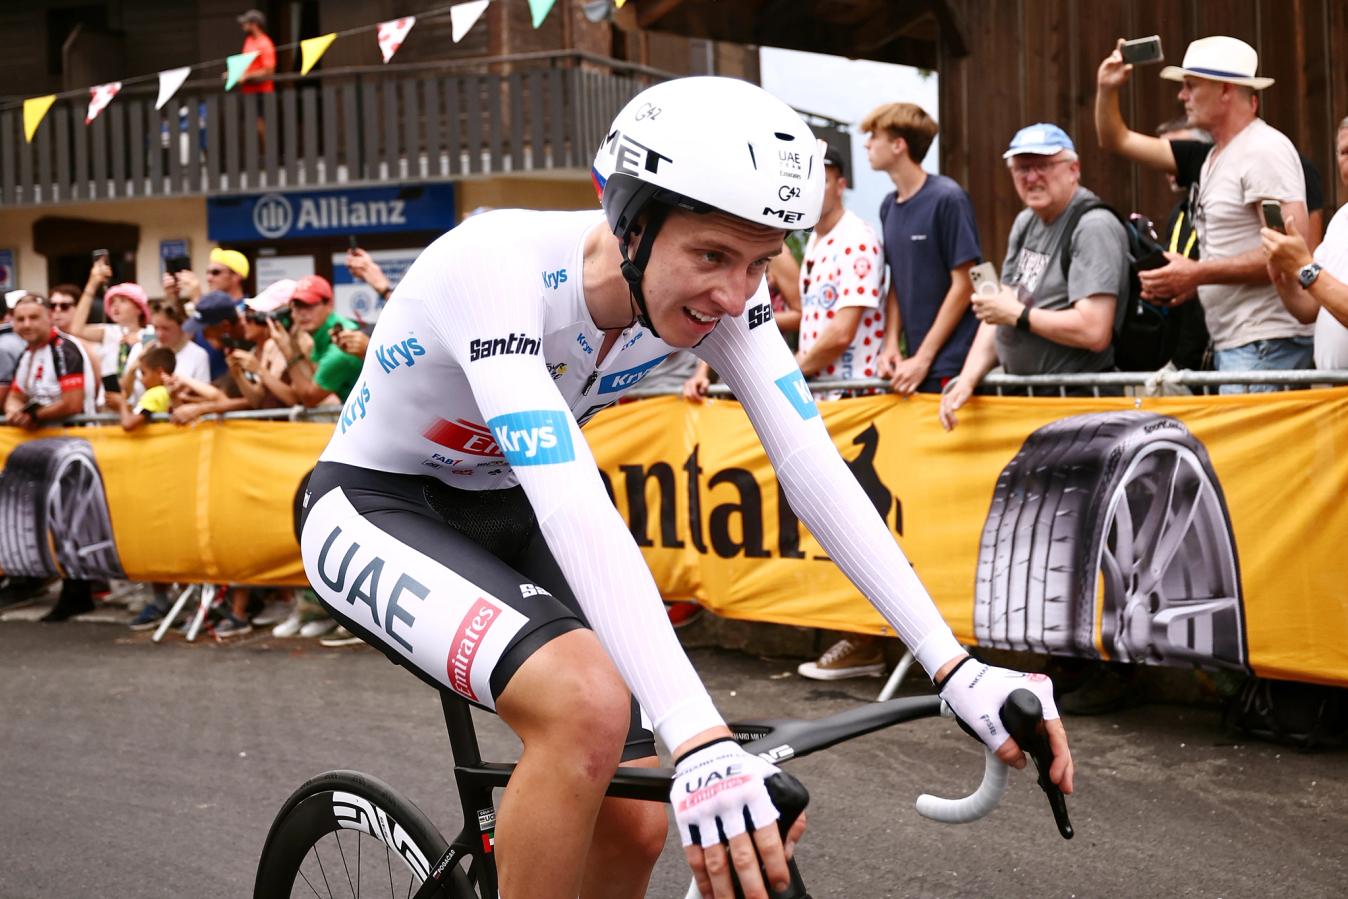 Tadej Pogačar saw his hopes of winning the Tour de France suffer a monumental blow in the time trial